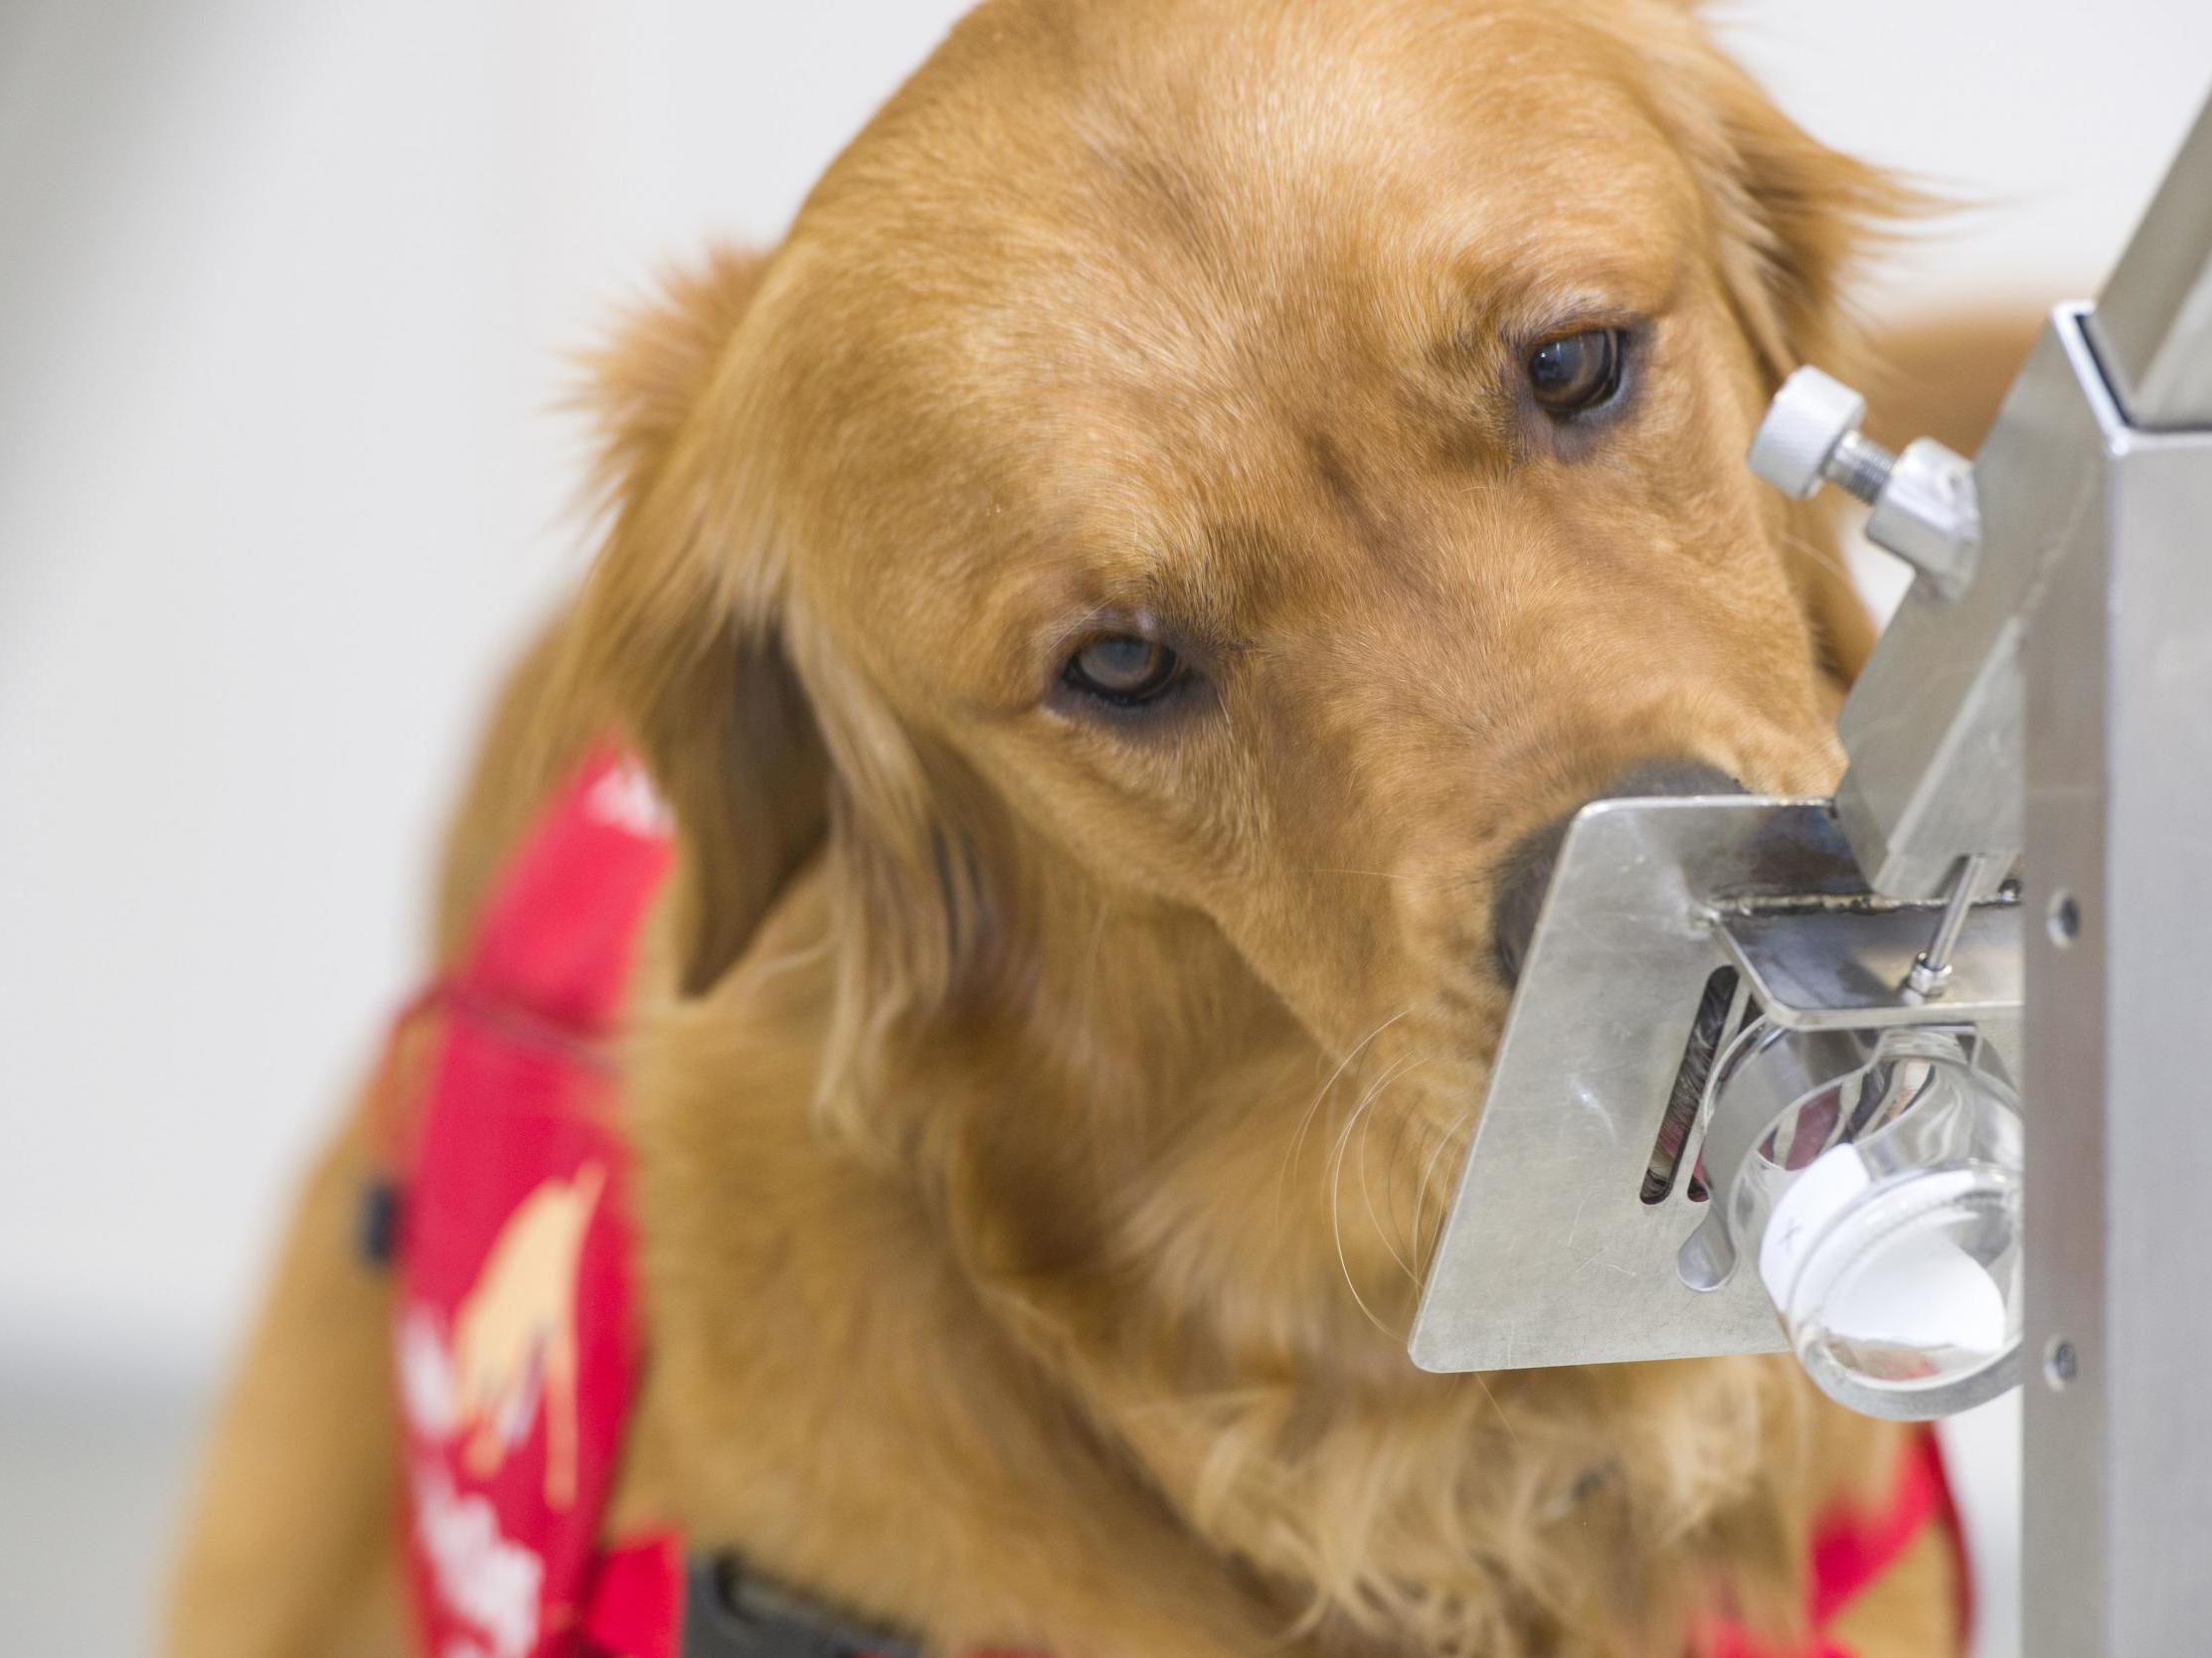 Coronavirus: NHS to use sniffer dogs in Covid-testing trial